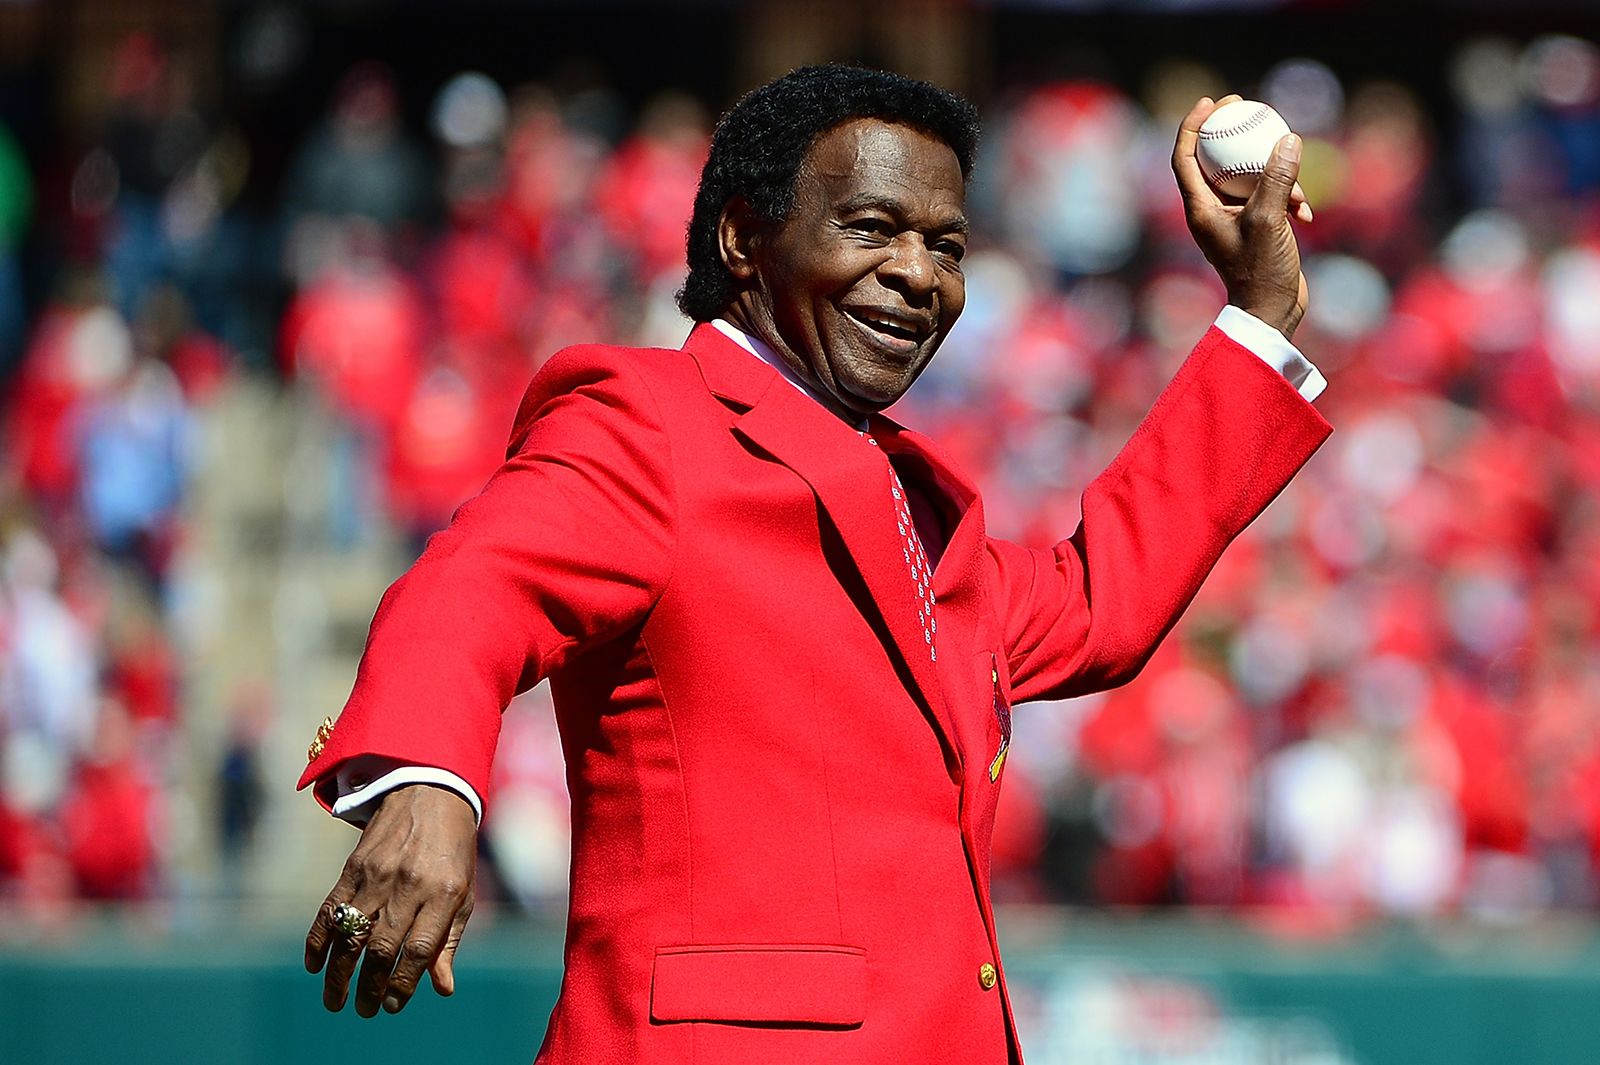 Lou Brock, Baseball Hall of Famer Known for Stealing Bases, Dies